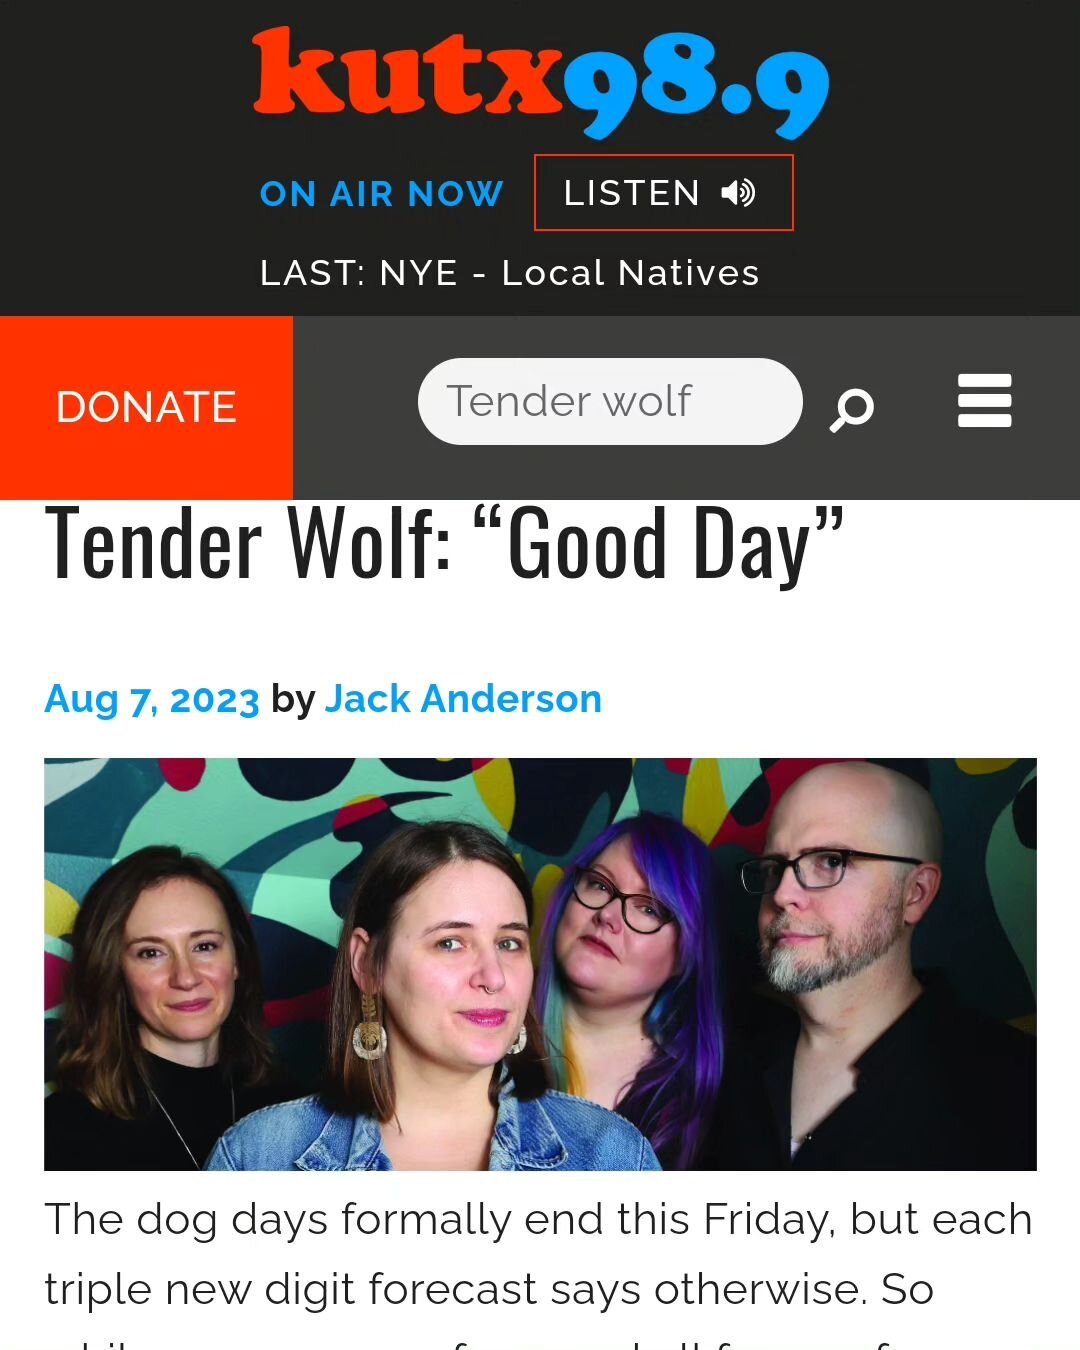 📻 GOOD DAY is the @kutx song of the day today! Thank you to Jack and KUTX! Scroll through for a beautiful wolfy writeup by @backhanderson. Today I learned I've never been more proud of anything I've created more than I am to be called &quot;orchestr